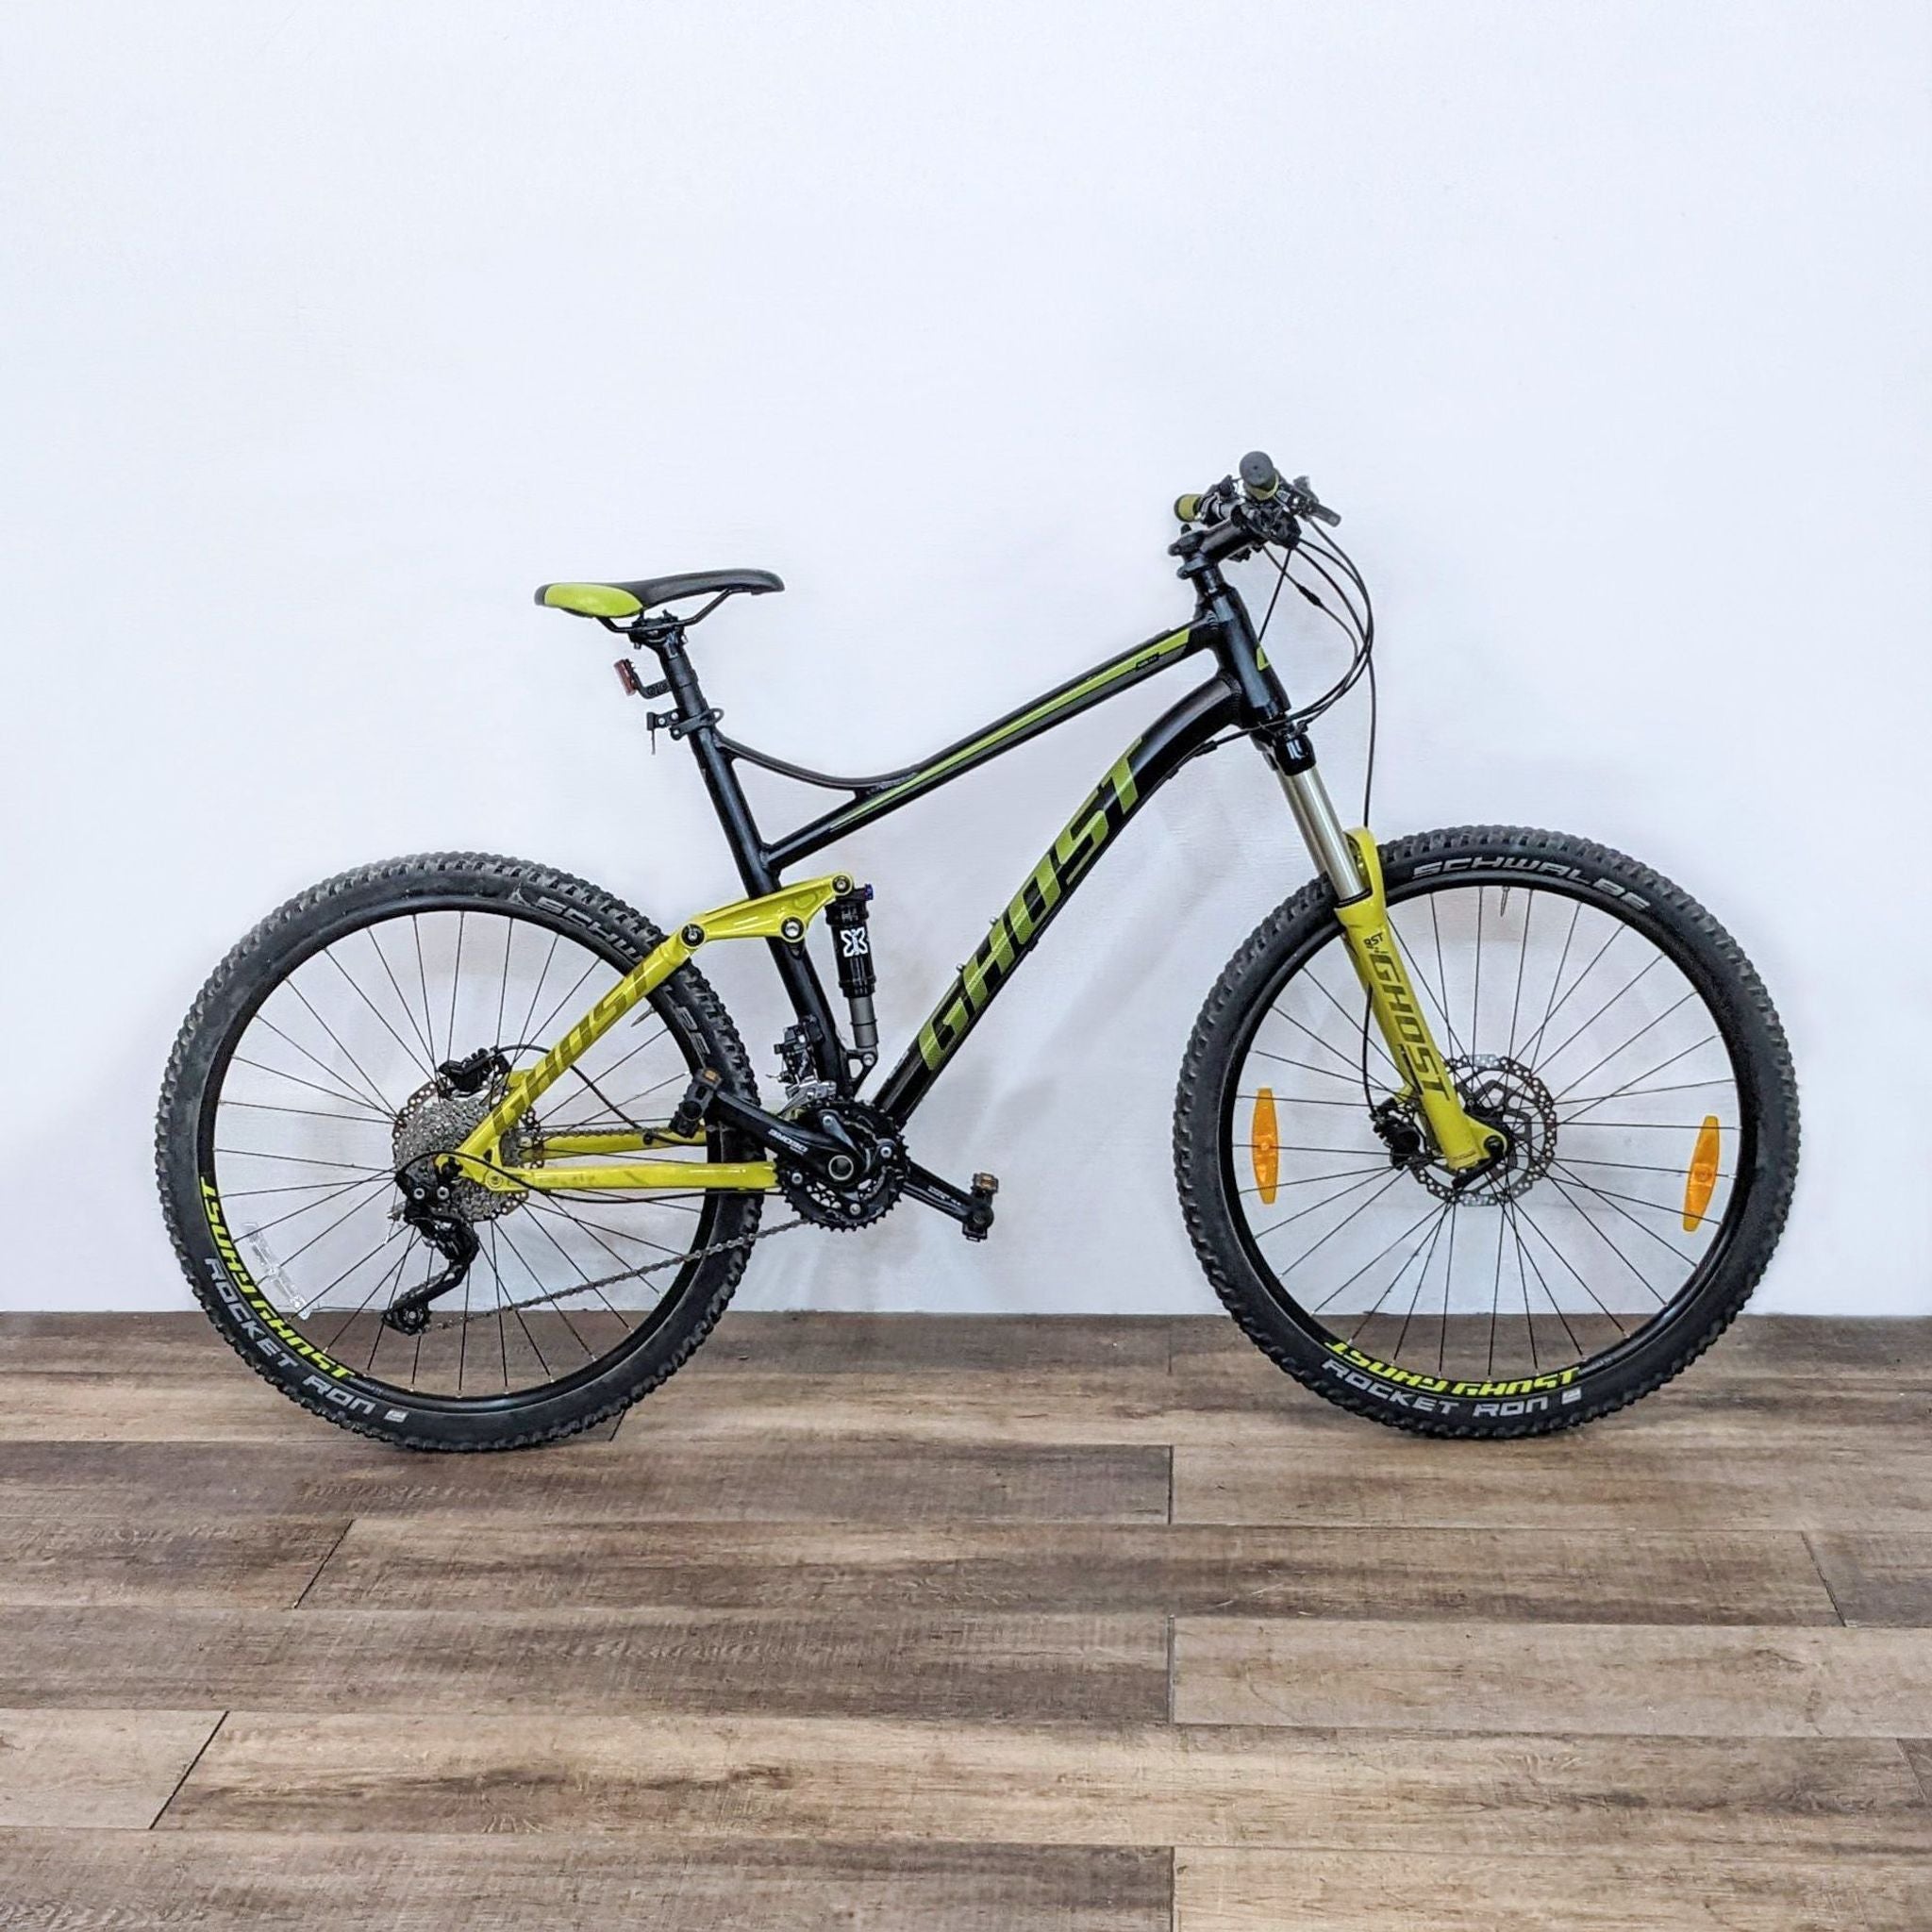 Bright yellow and black REI mountain bike with sturdy full suspension, built for off-road riding and safety.